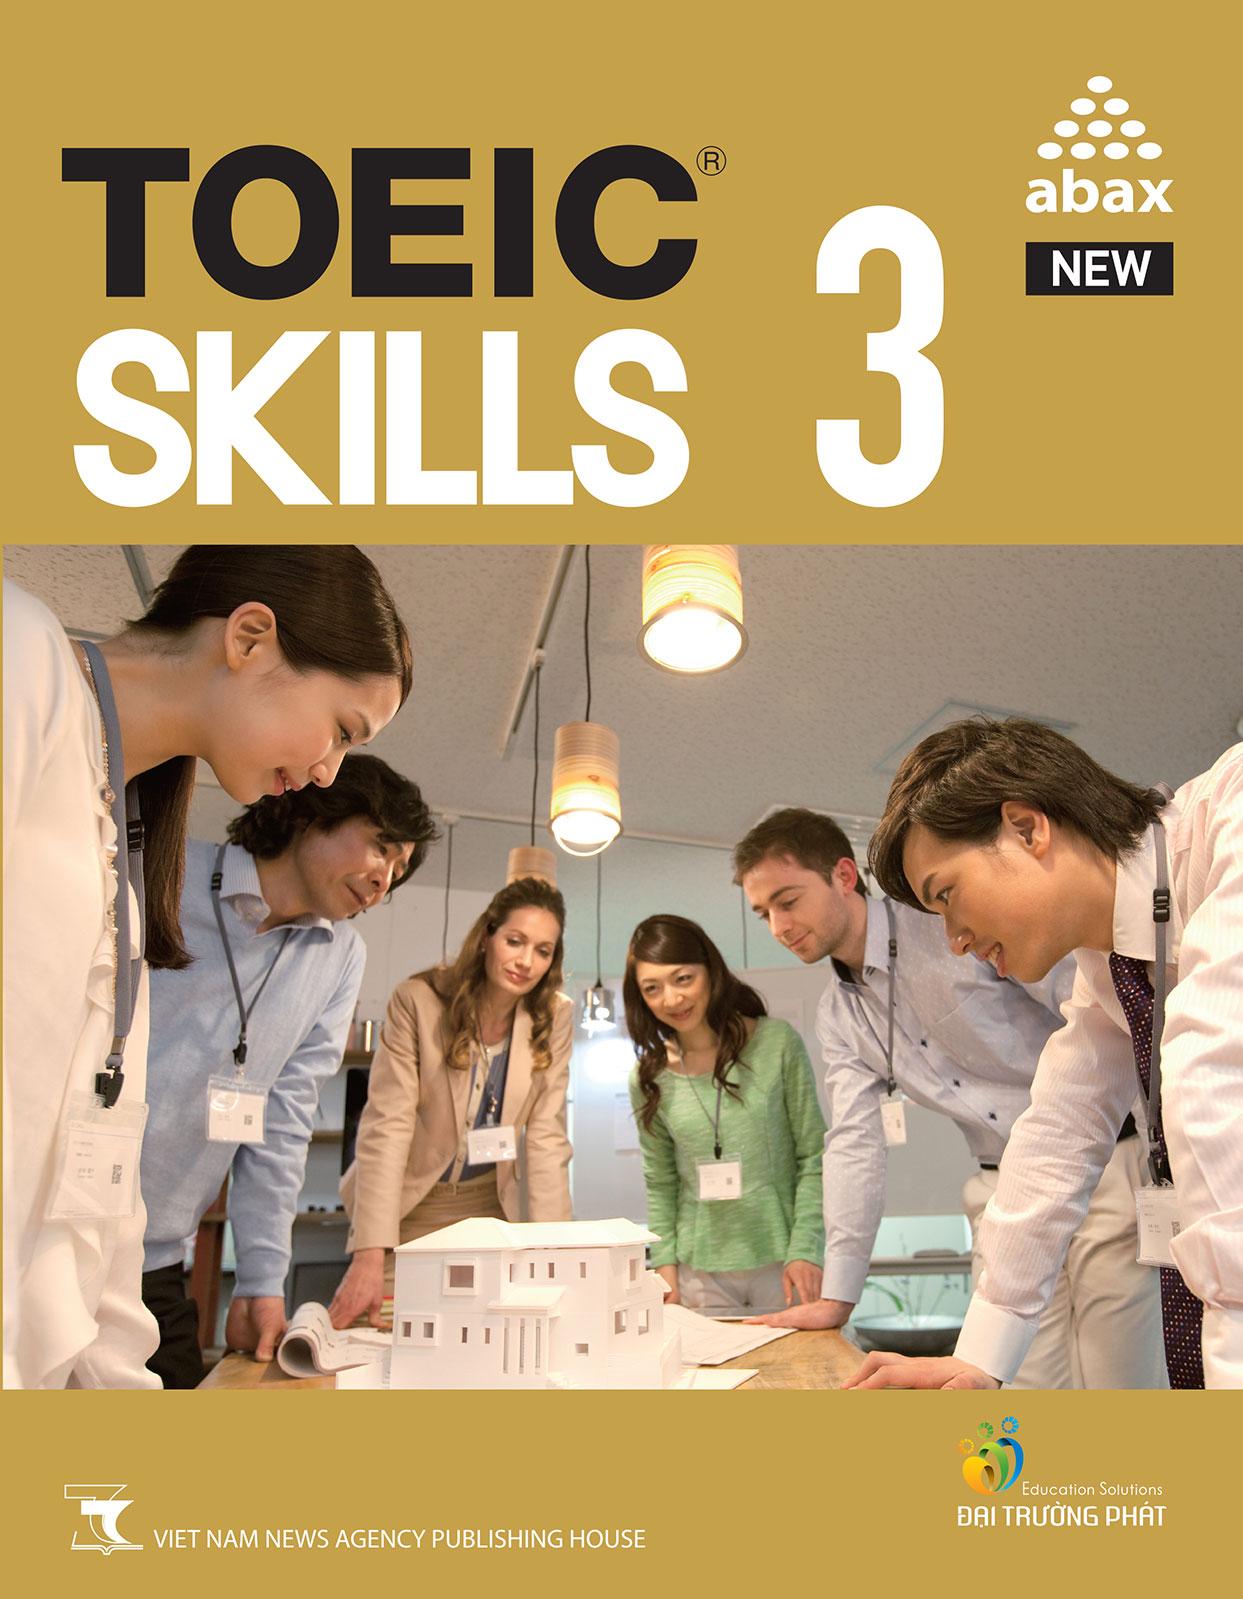 New TOEIC Skills 3 Student's Book (with MP3 CD &amp; Online Practice Test)